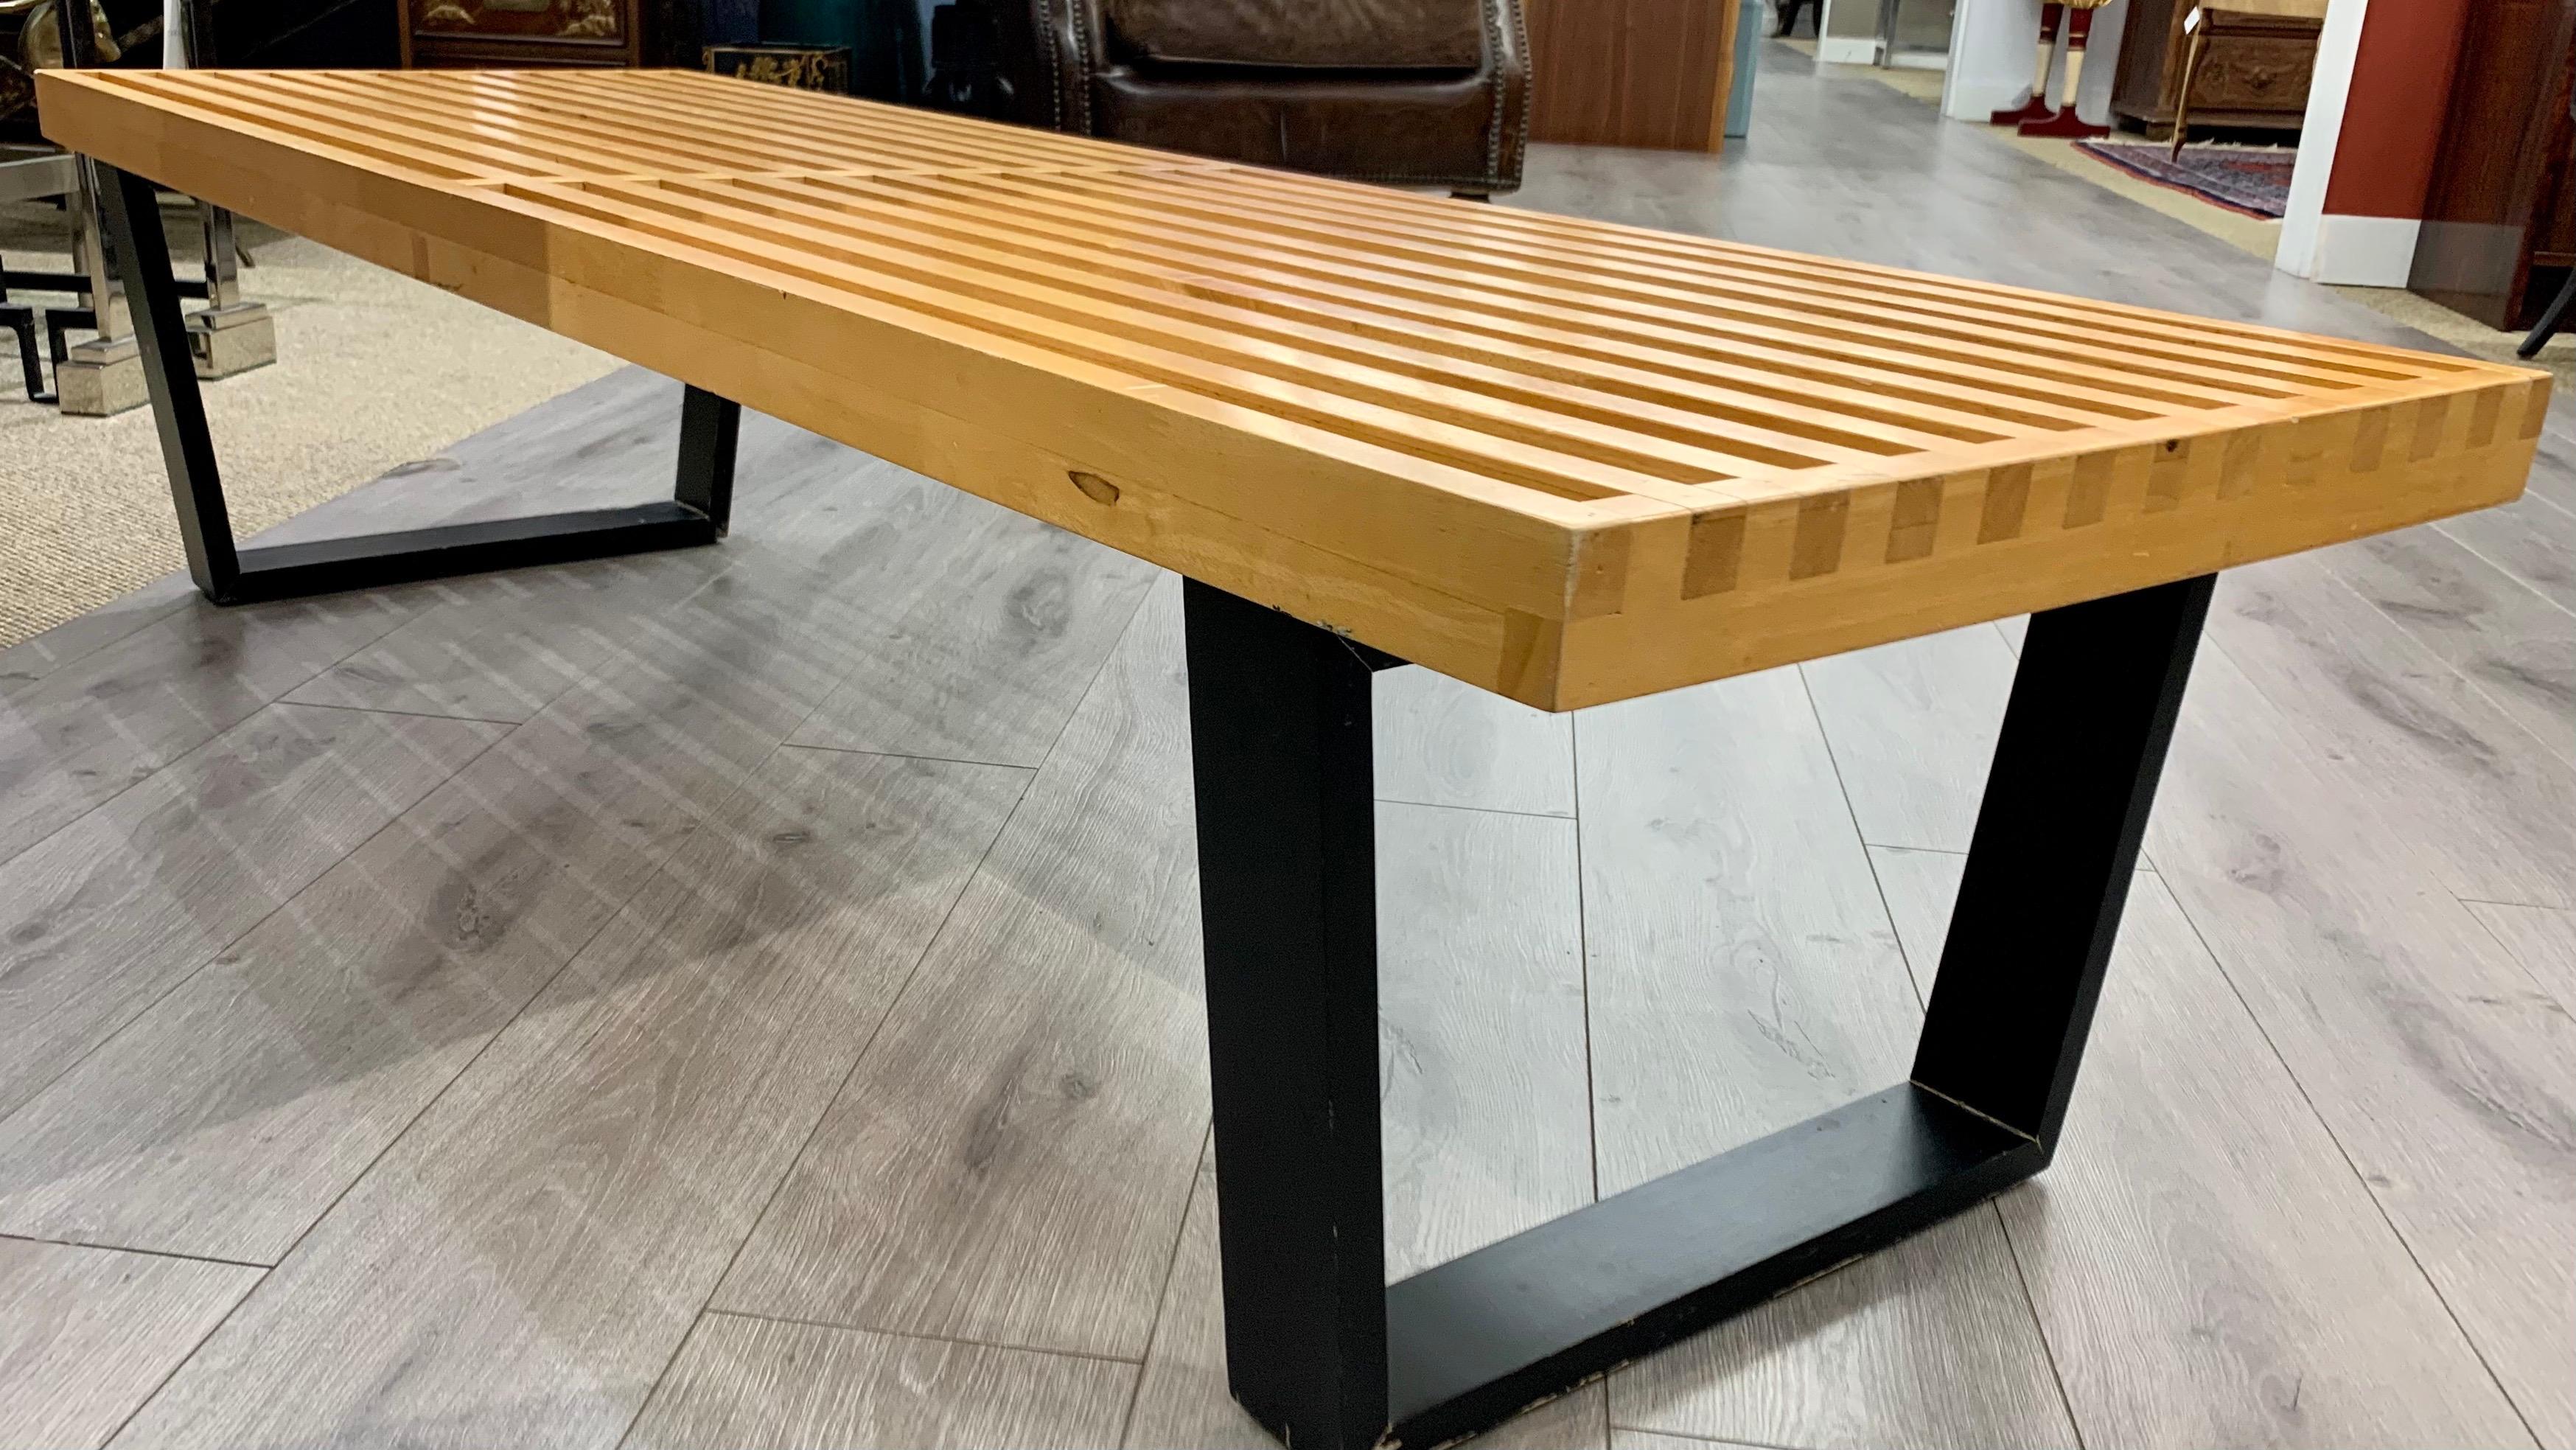 Iconic, signed Herman Miller midcentury wooden slat bench/cocktail table. Multi-purpose and
ingenious. Now more than ever, home is where the heart is.